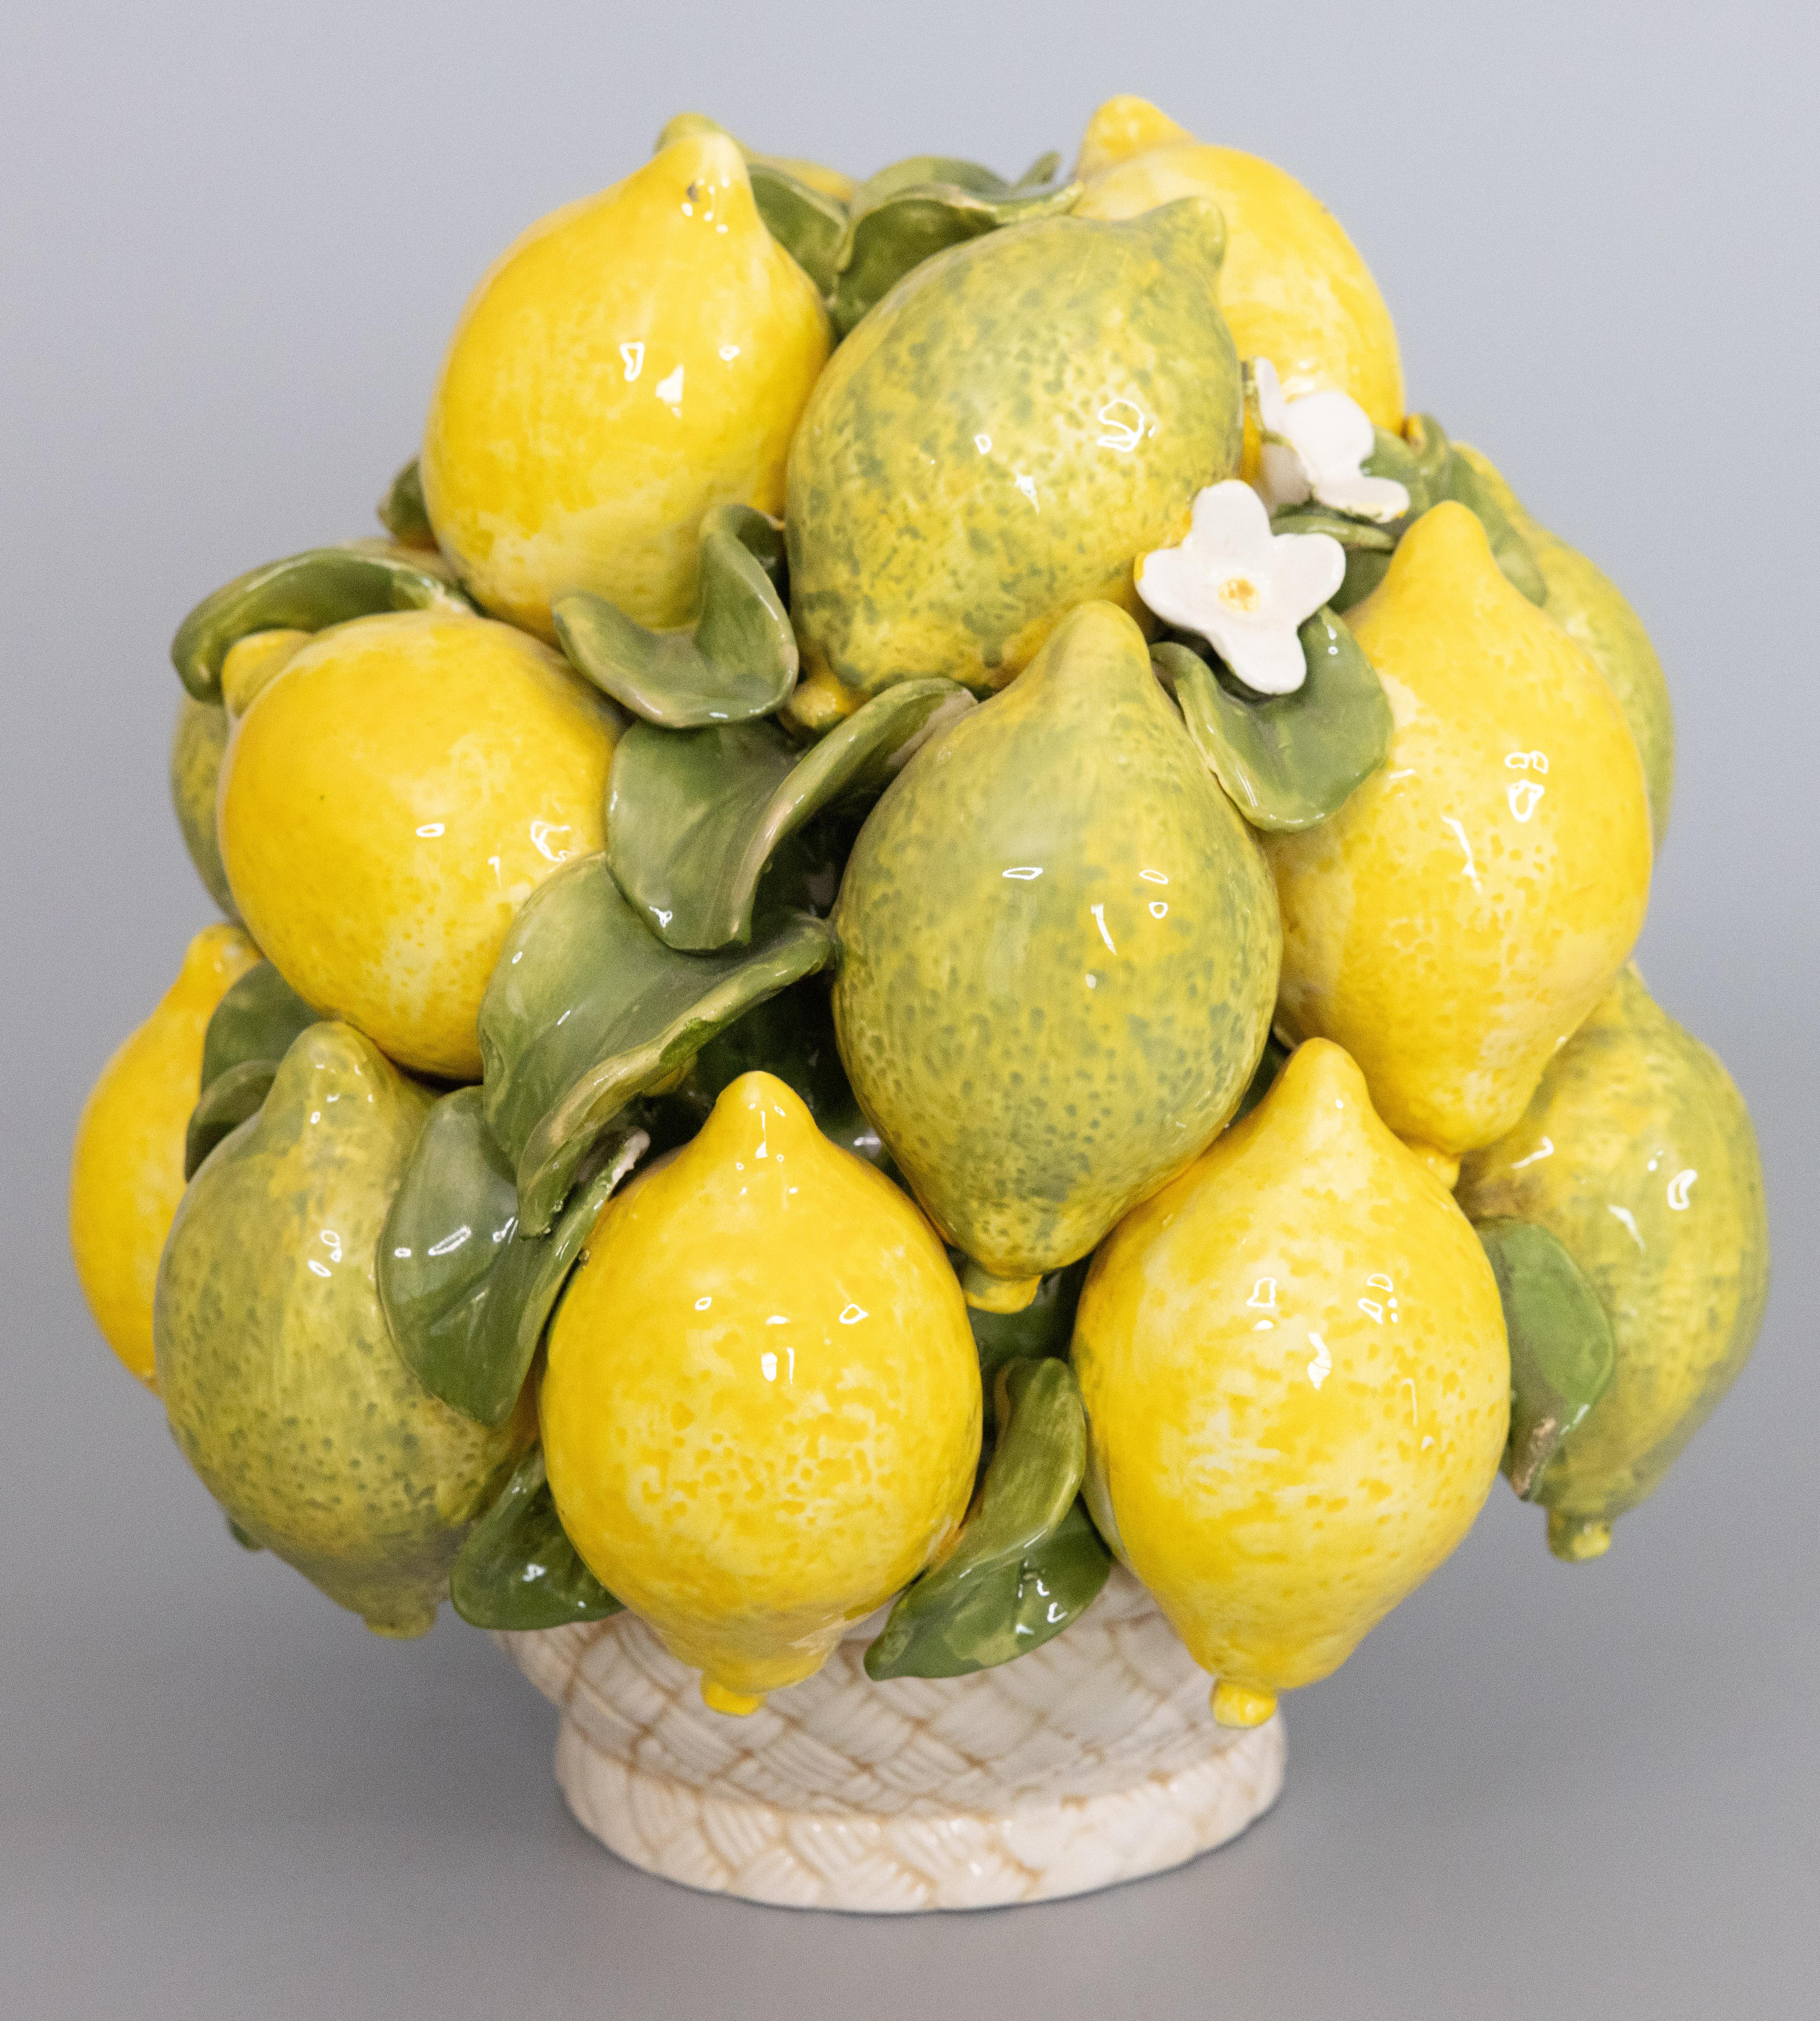 A lovely Mid Century Italian majolica lemons and limes topiary basket table centerpiece. Brighten up your kitchen or dining room with this beautiful hand painted arrangement of lemons and limes, accented by vibrant green leaves and flowers, in a